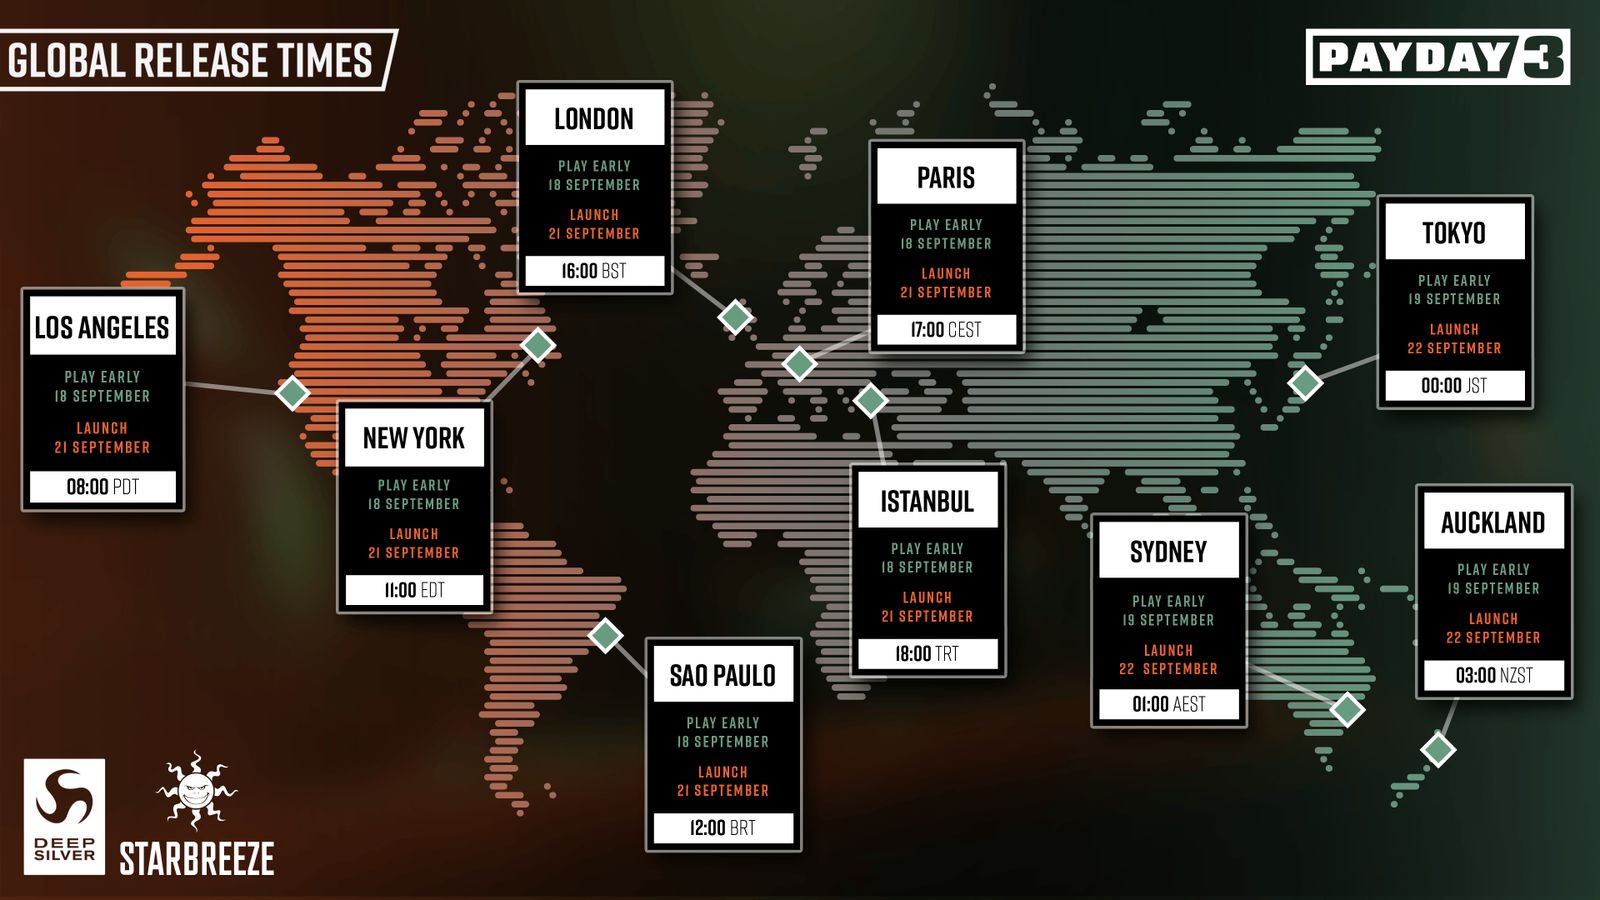 The global map showing Payday 3 release times